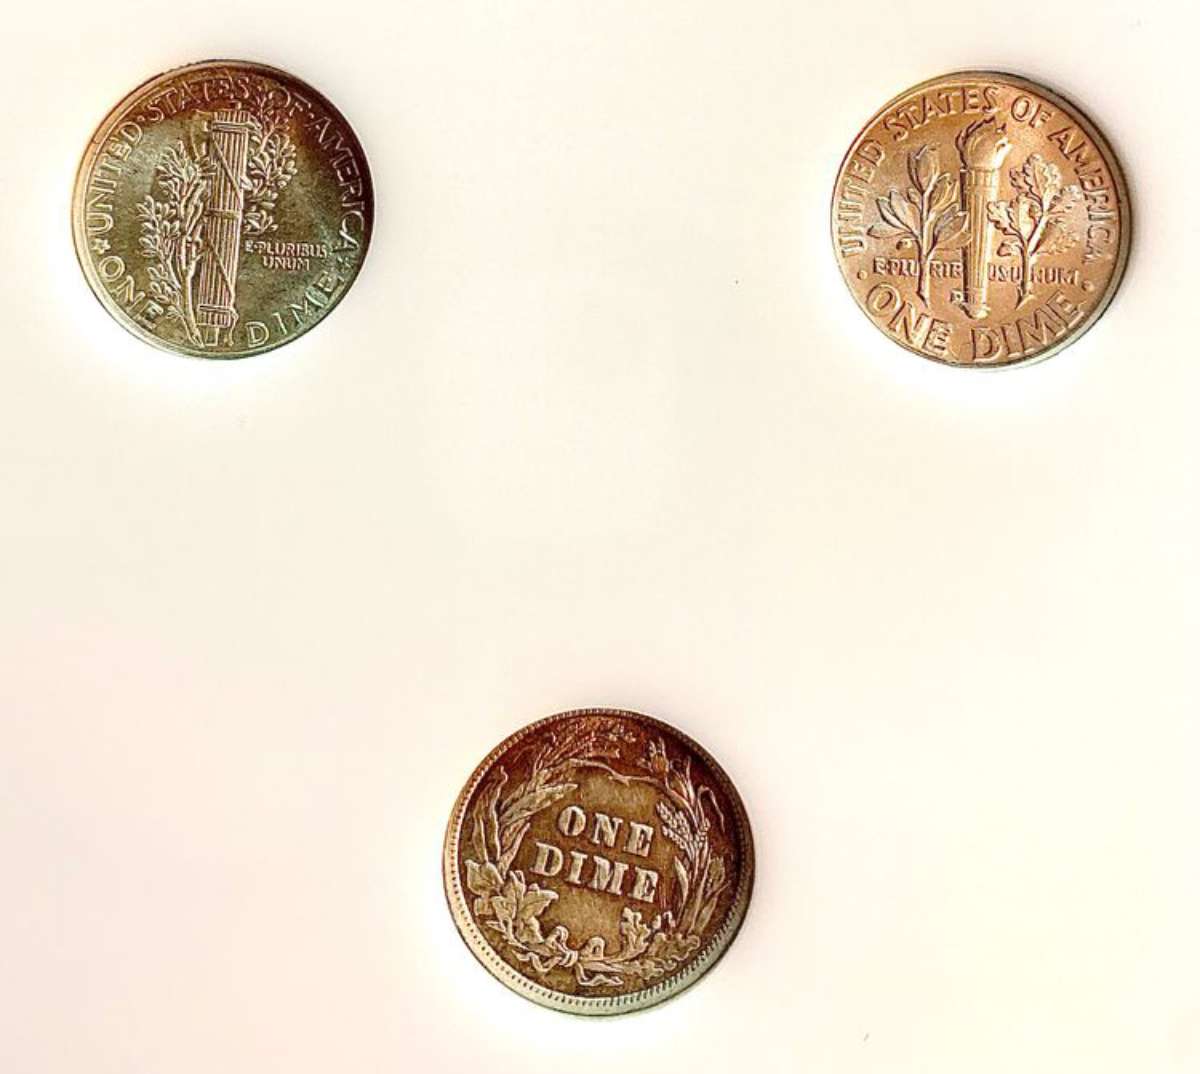 Clockwise are seen the reverse of the Mercury dime, Roosevelt dime, and Barber dime. 